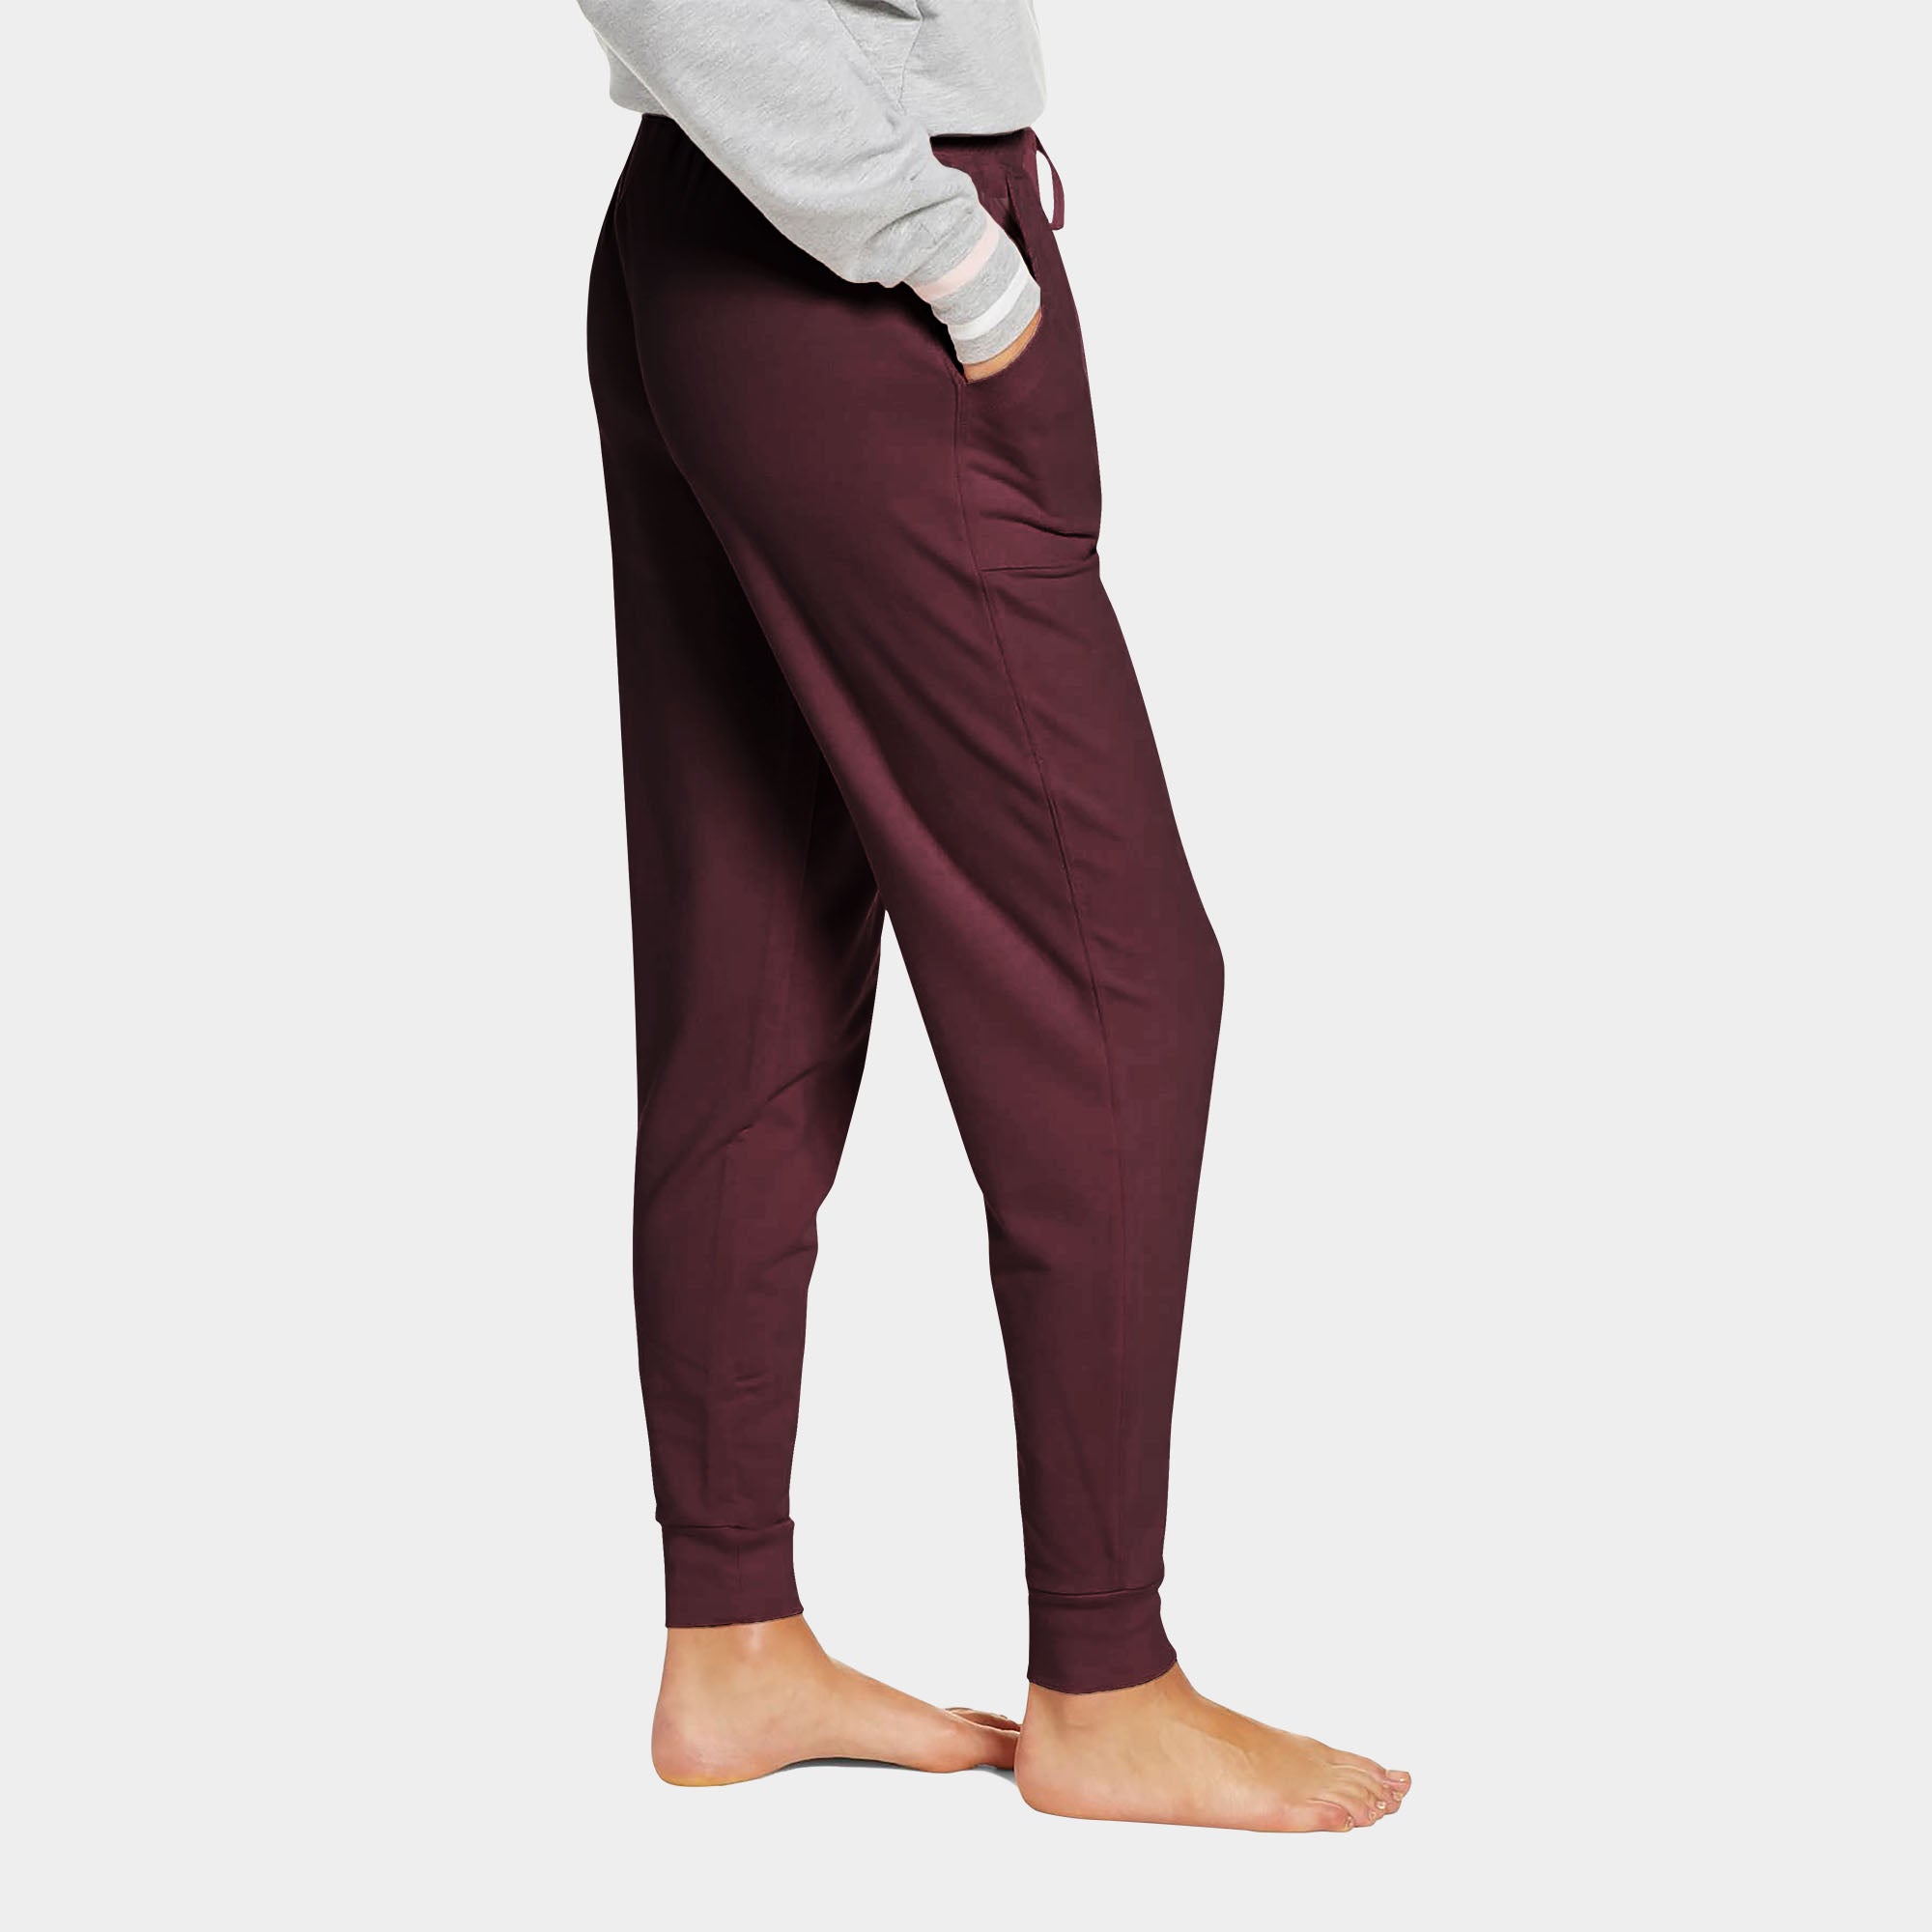 womens fleece sweatpants_yoga joggers_plush inner lining comfort_ribbed cuffs_lady_ladies_sweat for women_activewear_fleece_workout_exercise_weight_pilates_outdoor_indoor_at home_training_running_jogging_hiking_colorfulkoala joggers_yesler_amormio sweatpants_champion_beyond_yoga joggers_nike_rally white_nude sweatpants_lipservice pants_lounge around tan_hanes_teal_fancy_capri_love_french terry_light christmas cotton_Burgundy